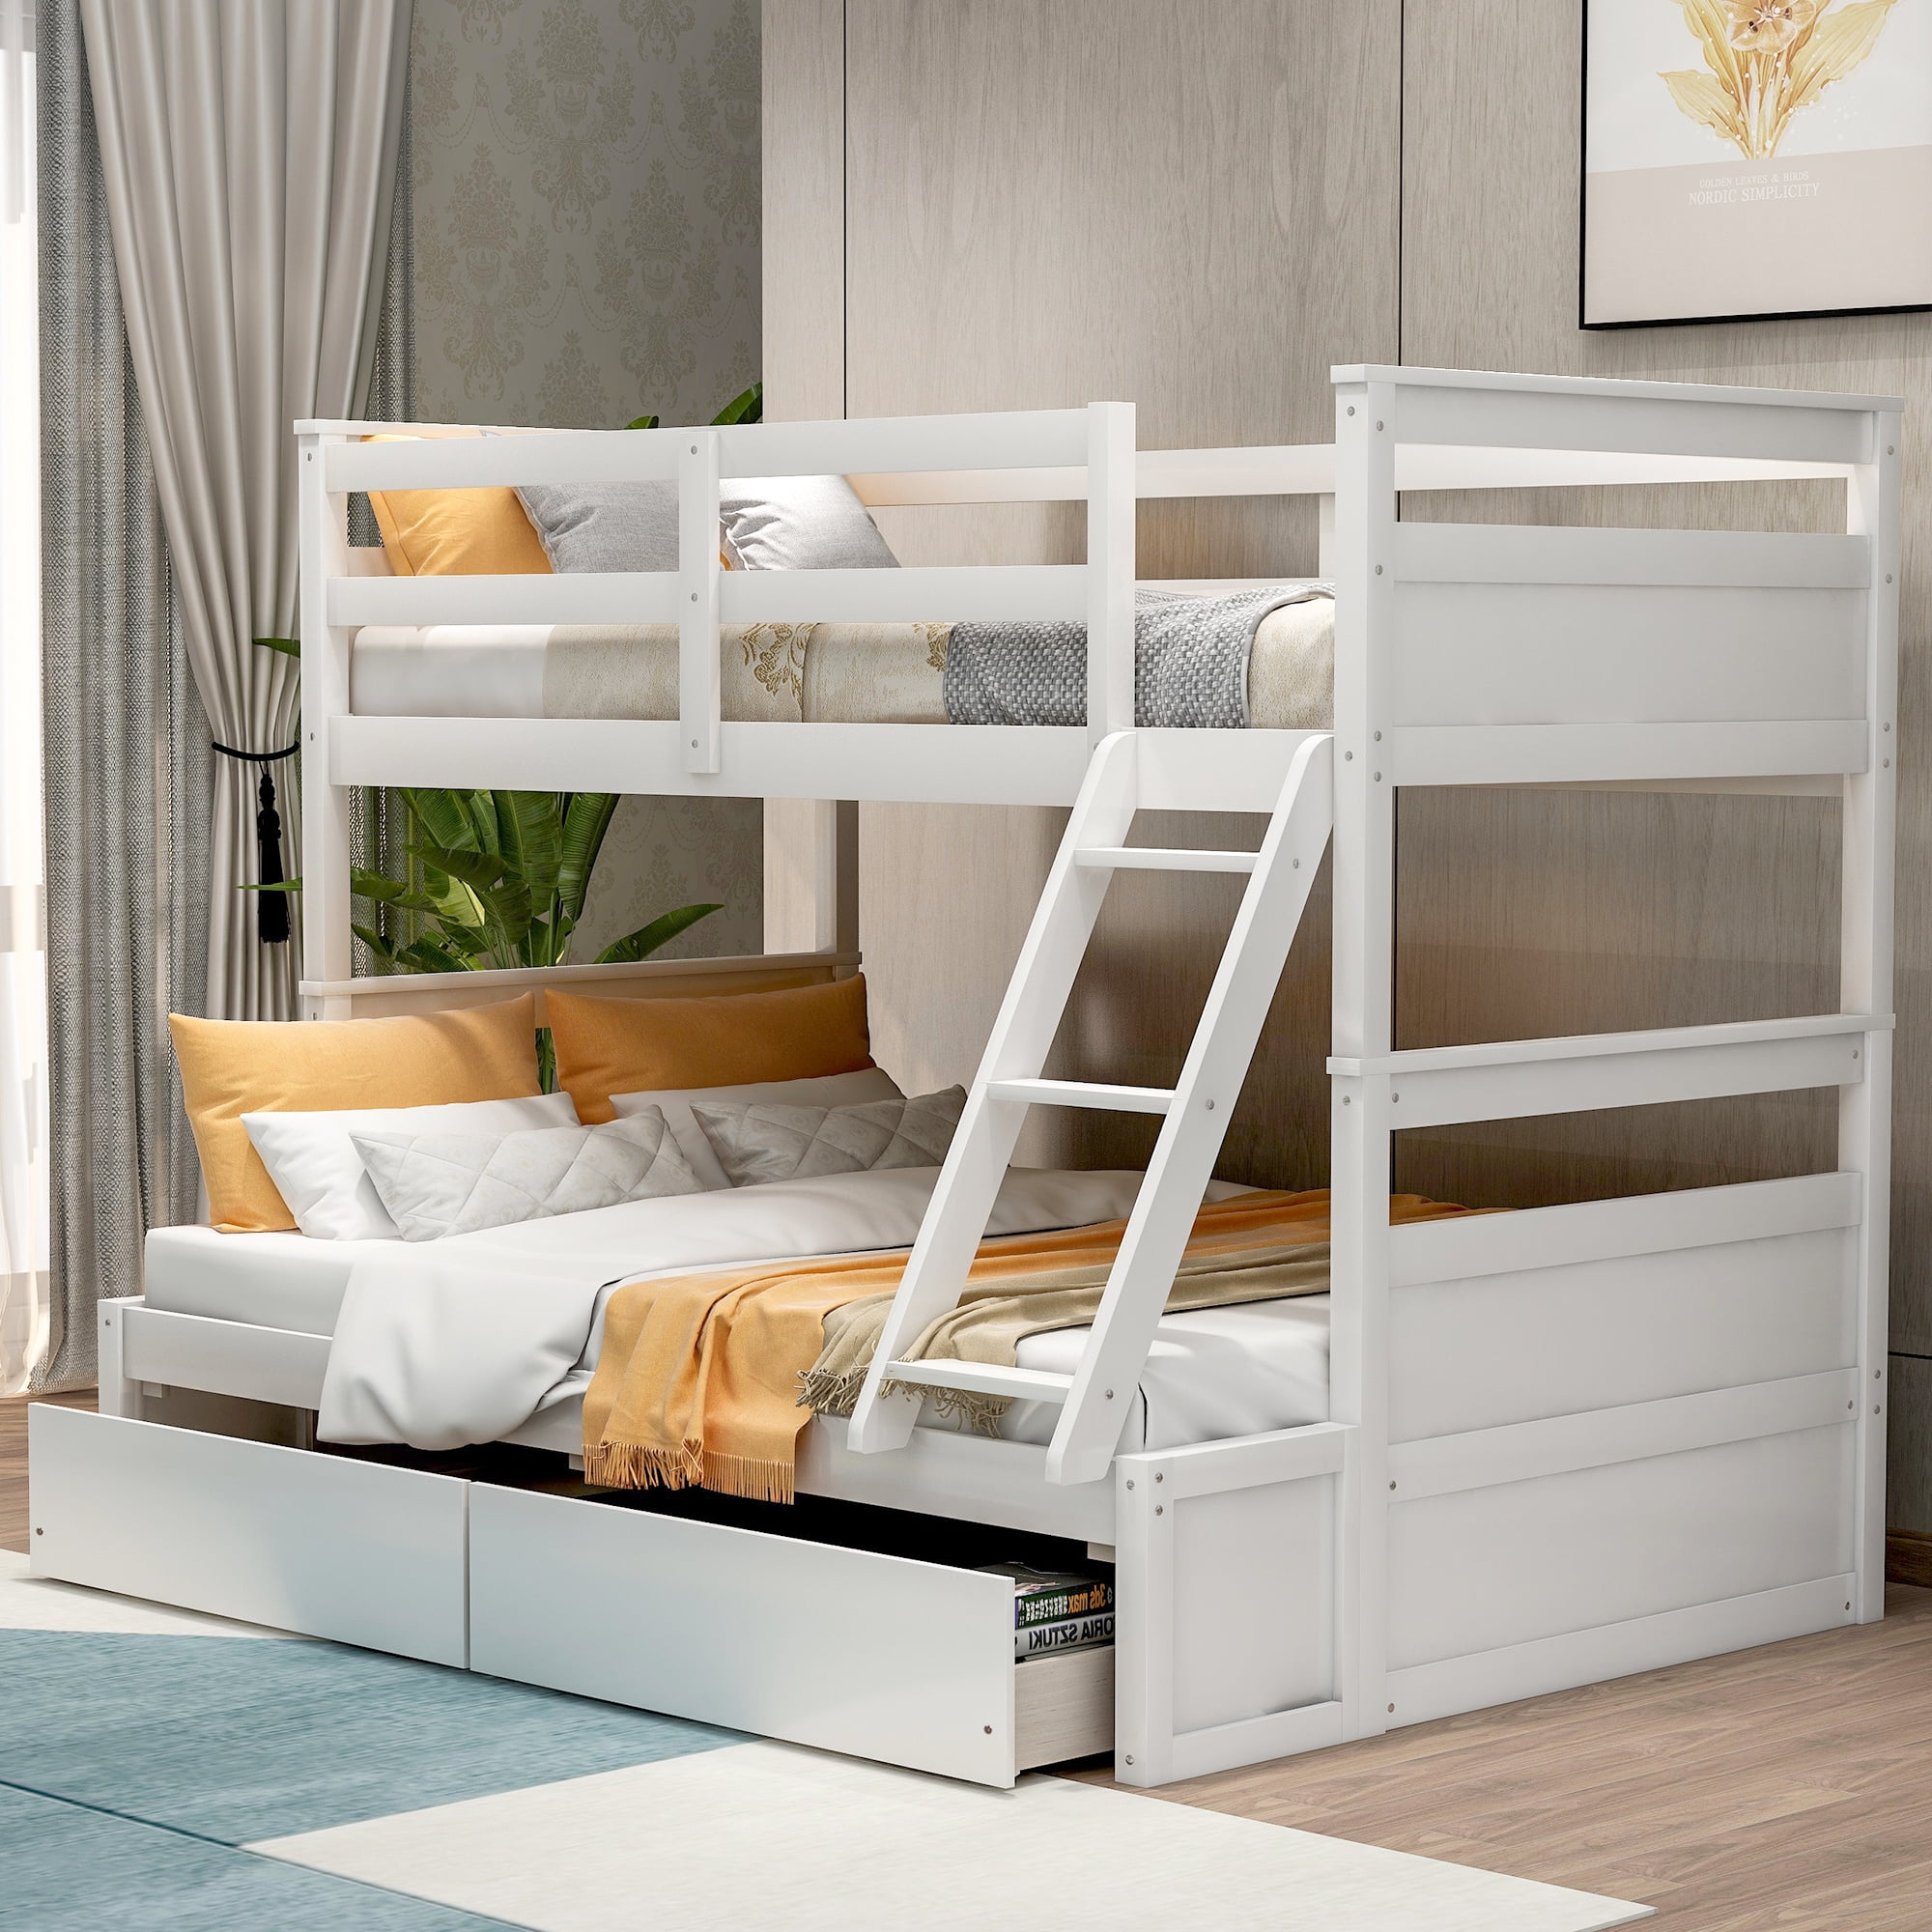 Dormitory Bed With Ladder Storage, Bunk Beds For Quadruplets